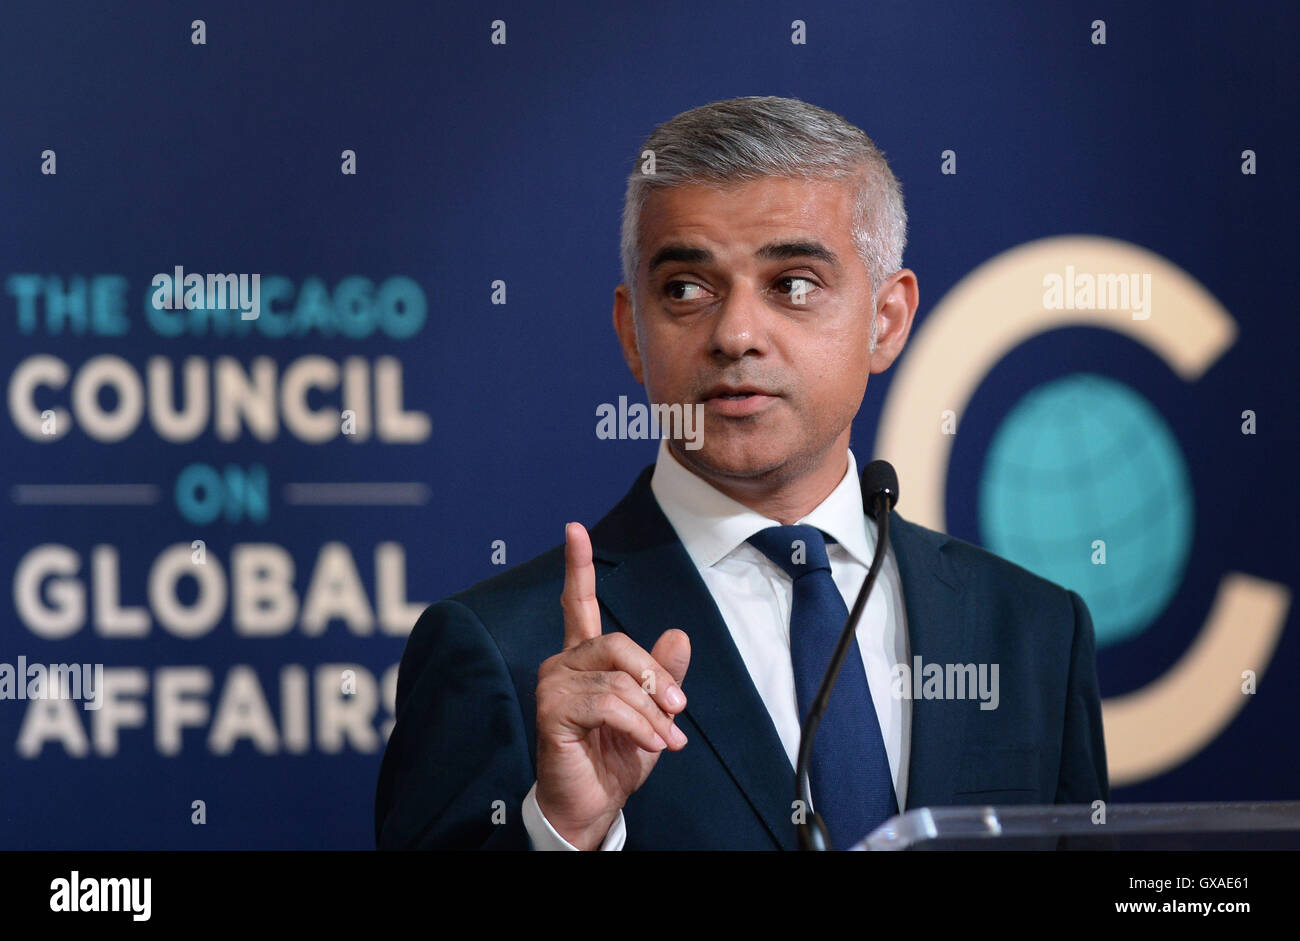 London Mayor Sadiq Khan makes a keynote speech to the Chicago Council for Global Affairs about social integration. The mayor is in Chicago to meet his counterpart, Rahm Emanuel, and is part of a five day visit to the United States. Stock Photo